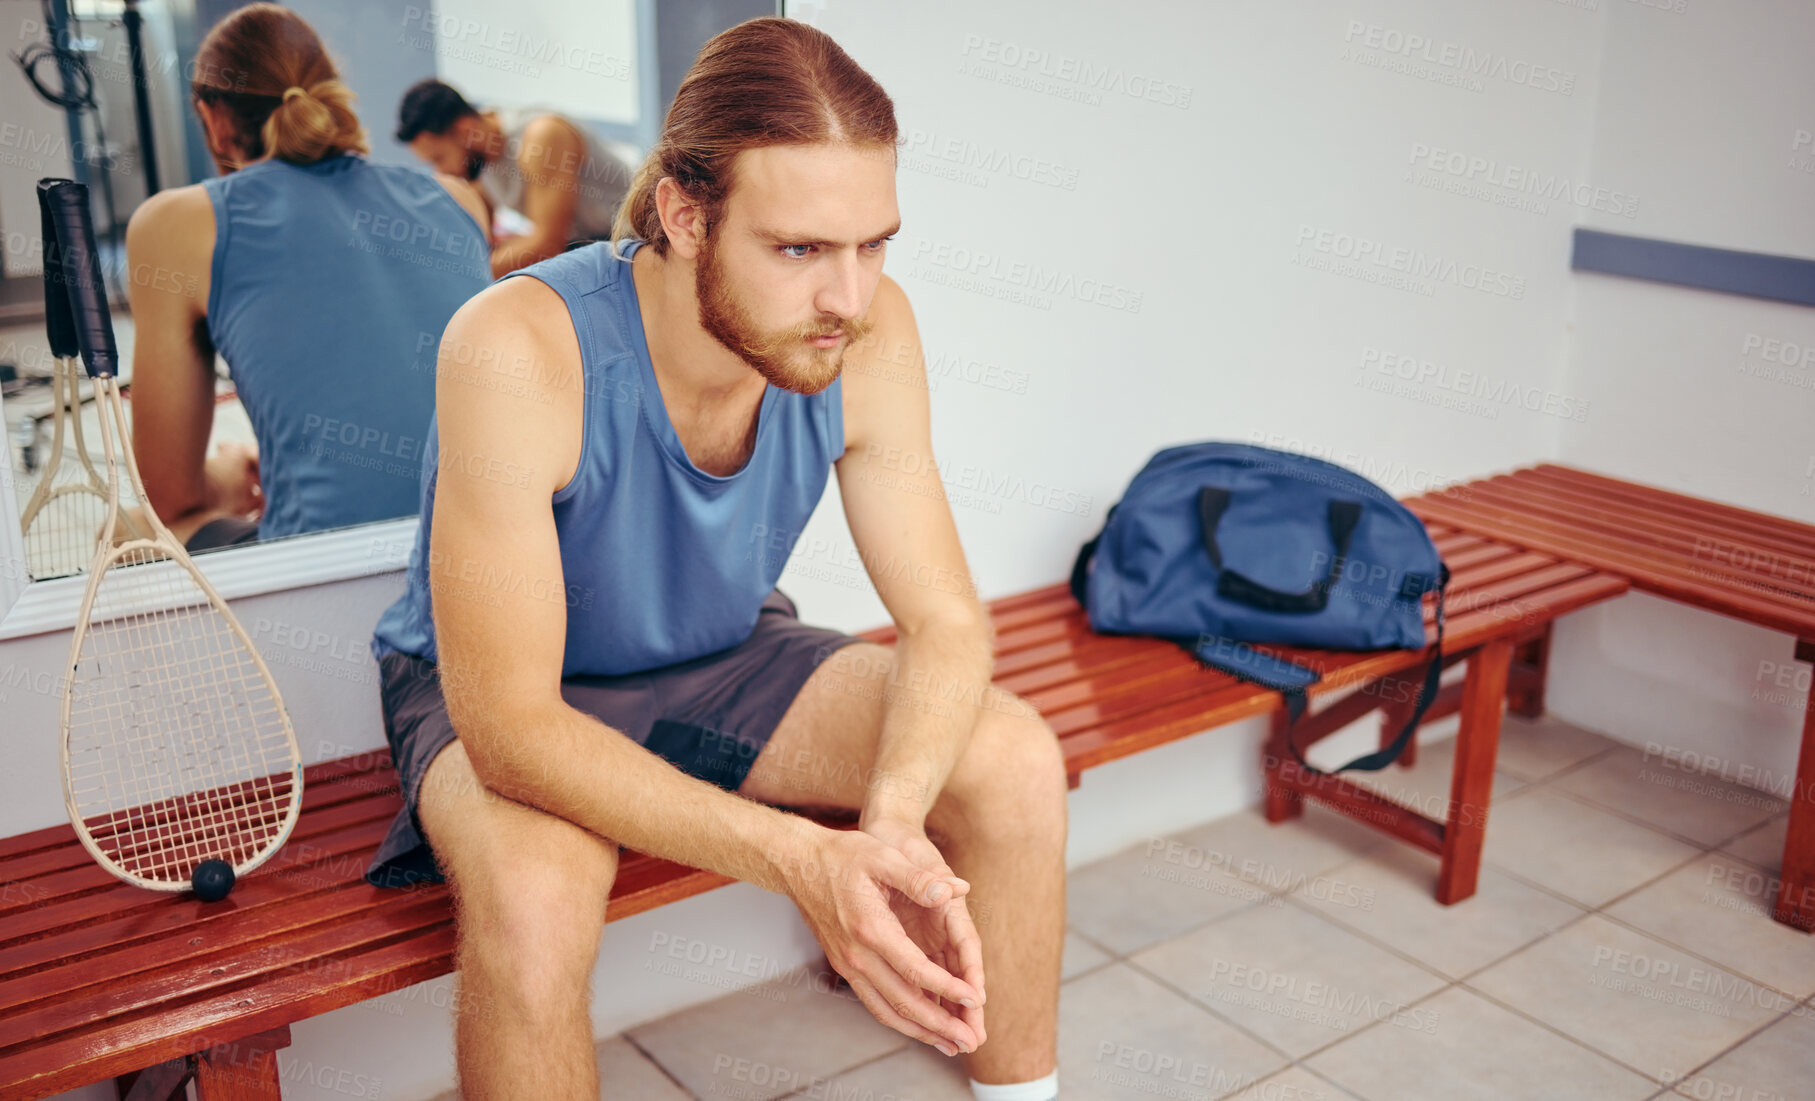 Buy stock photo Caucasian player sitting in a locker room with his squash racket. Two players resting together in a gym locker room. Fit young athlete sitting in a locker room thinking about his match